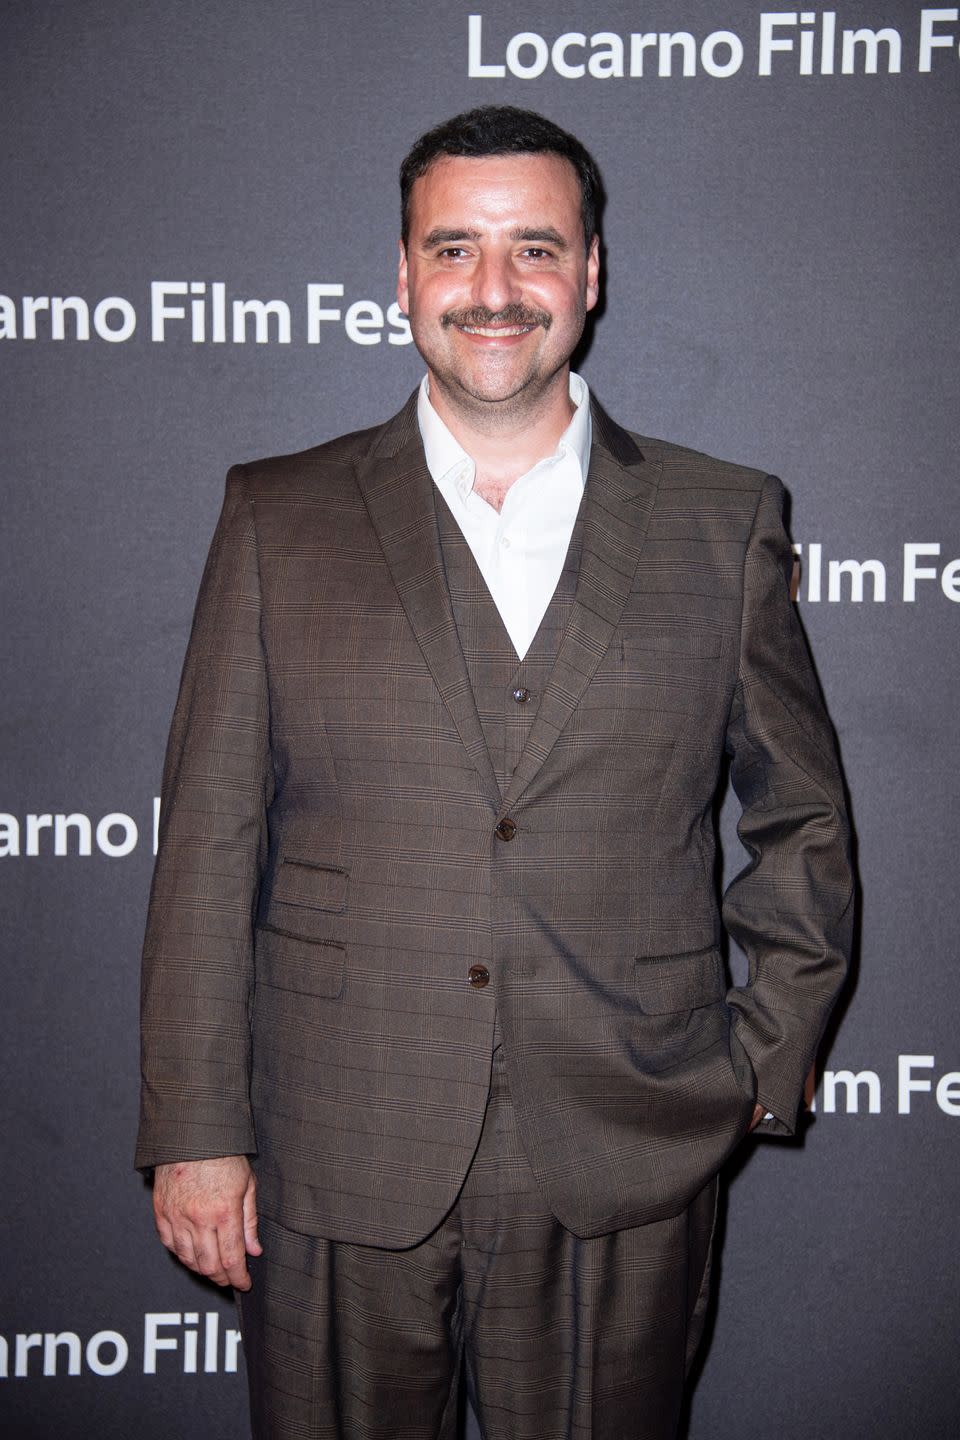 david krumholtz wearing a brown suit and smiling